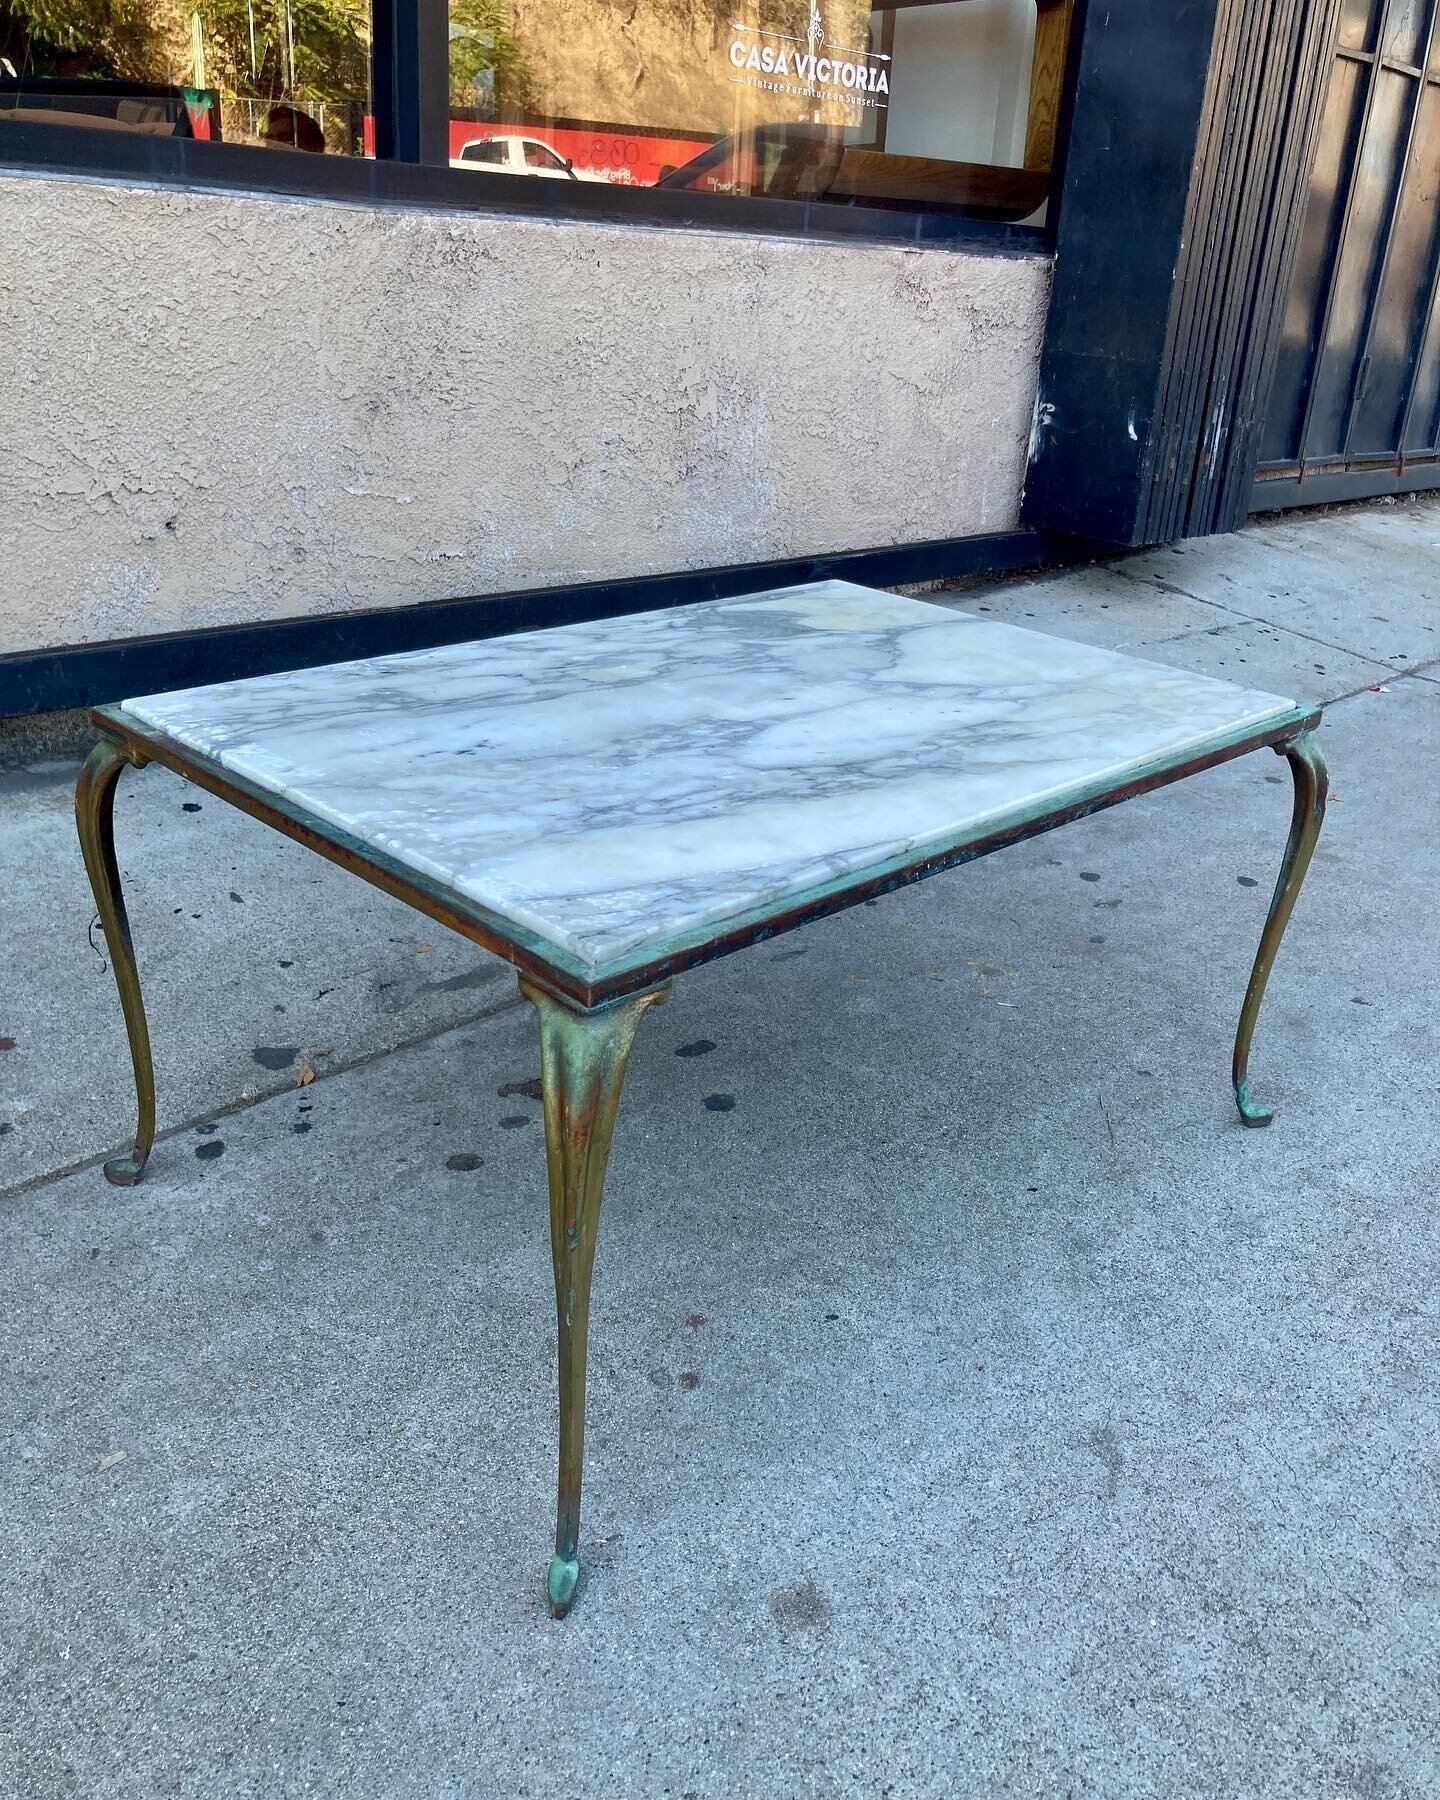 A classic French coffee table with original marble top, $450. 20 d x 28 w x 14.5 t. #casavictoriala #vintage #coffeetable #french #marble #midcentury #interiordesign #decor #setdesign #paris #nyc #london #la #interiordesign #homedecor #1stdibs #chair